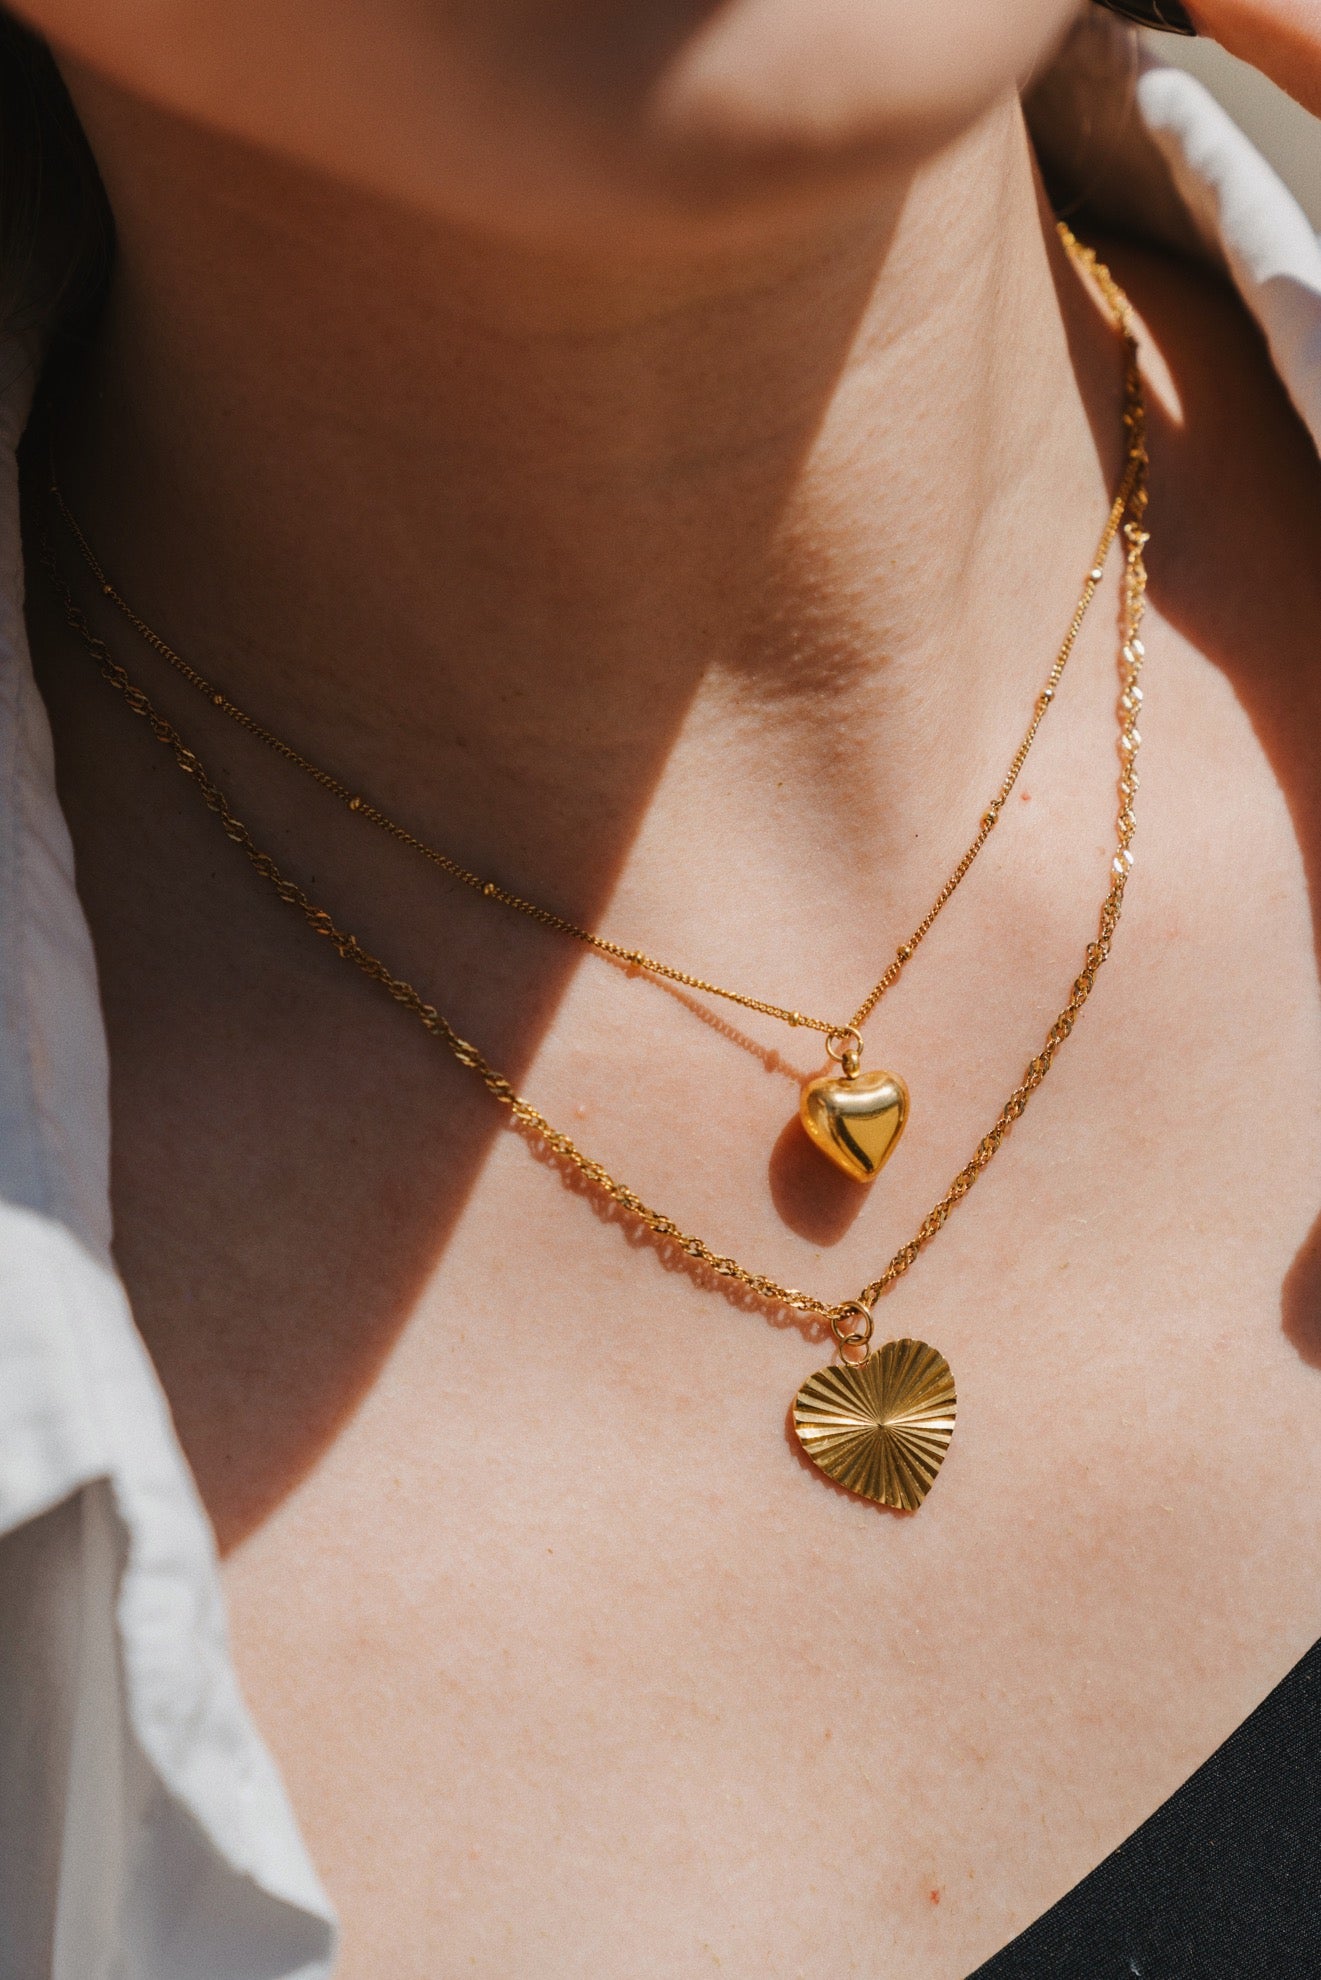 Betty Heart Charm Necklace